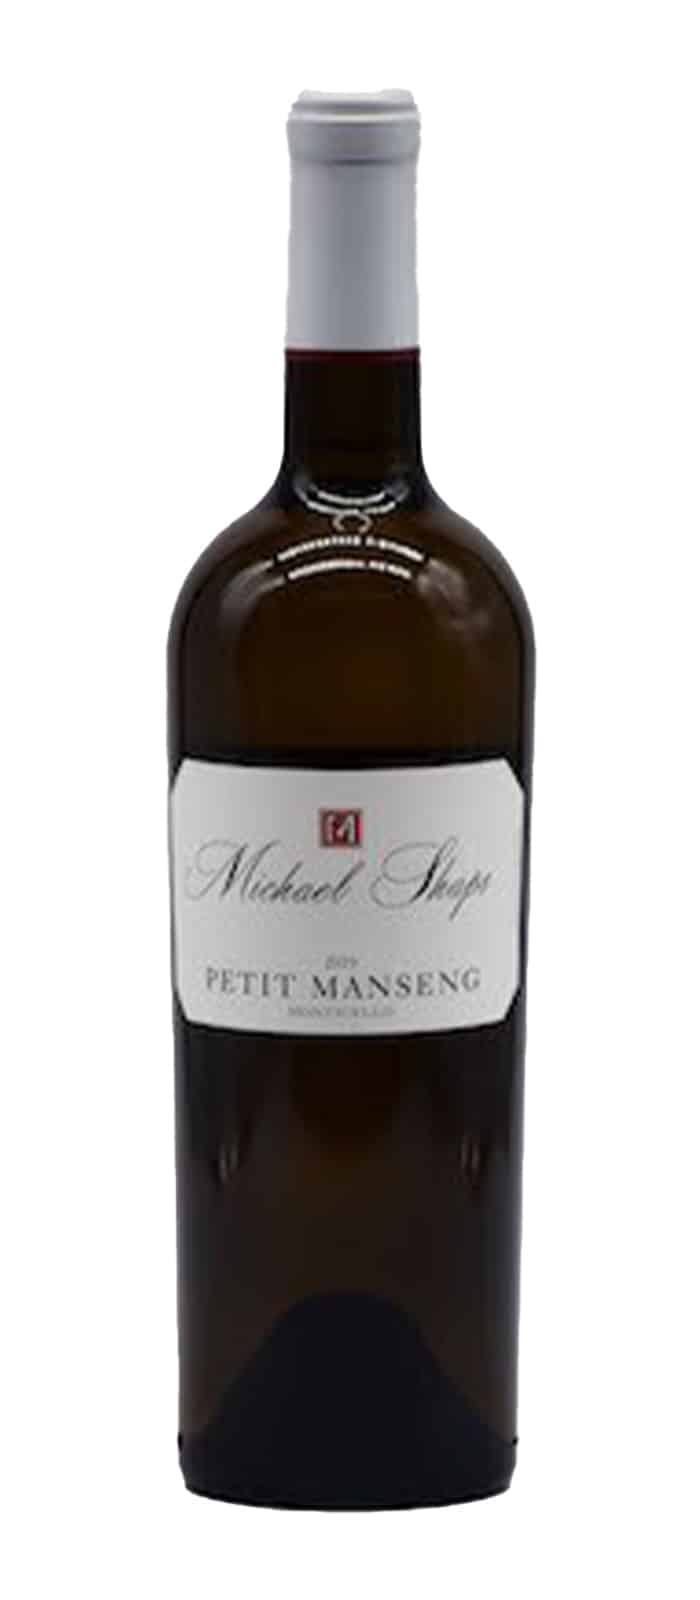 Bottle of Michael Shaps 2019 Petit Manseng, Gold Medal, Virginia Governor's Cup Wine Competition.